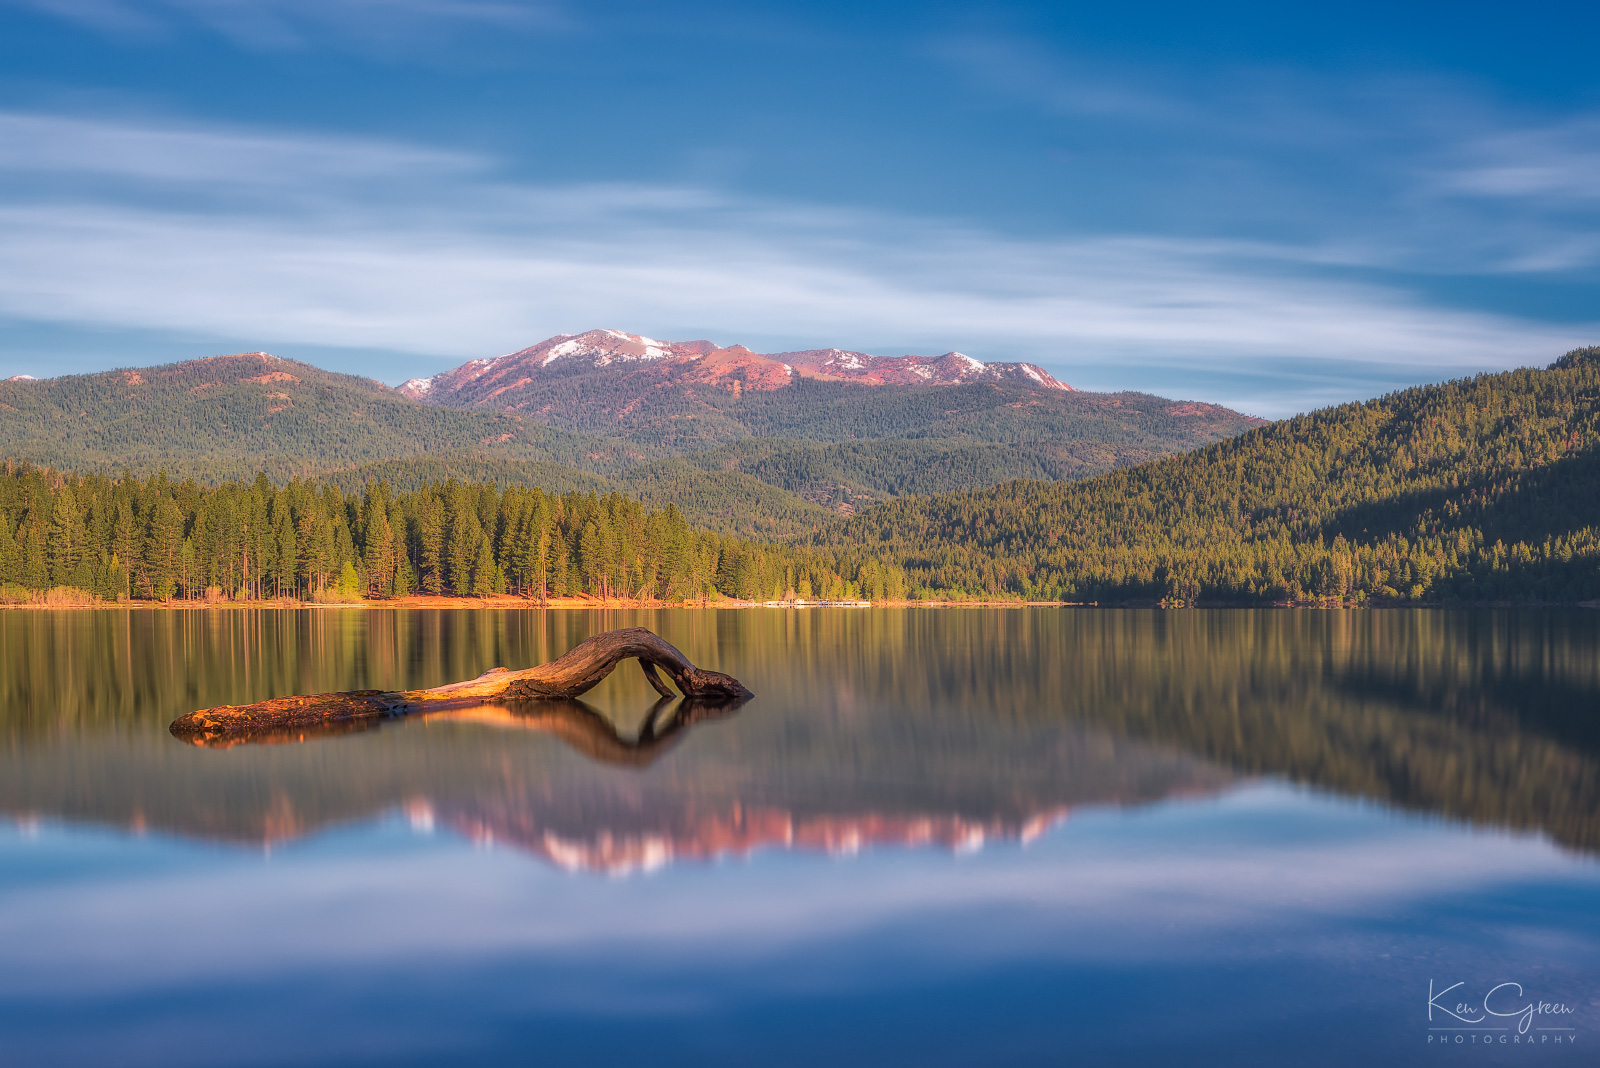 Drift wood floating on Lake Siskiyou with Shasta-Trinity National Forest in the background.